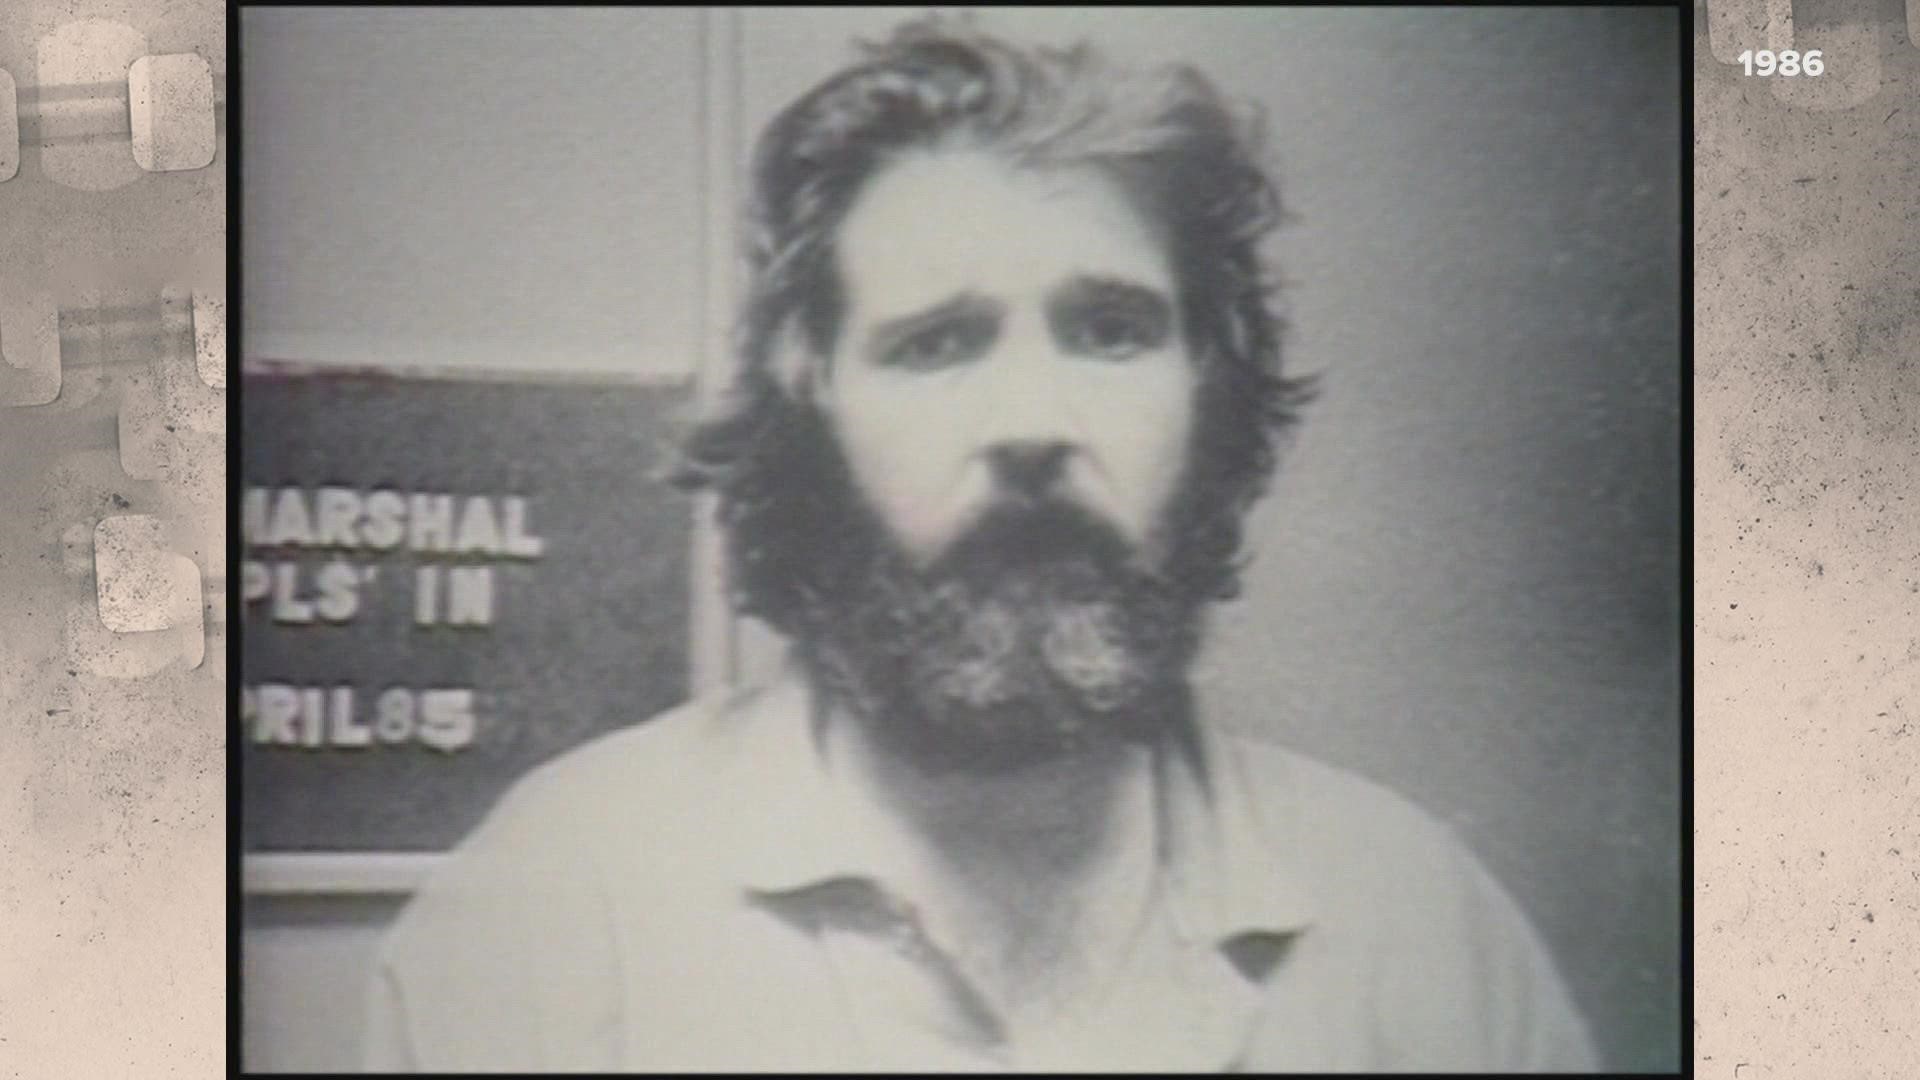 This week's Vintage KSDK takes us to a dark week in our area's history. In the fall of 1986, a 10-day manhunt was underway for the fugitive Michael Wayne Jackson.